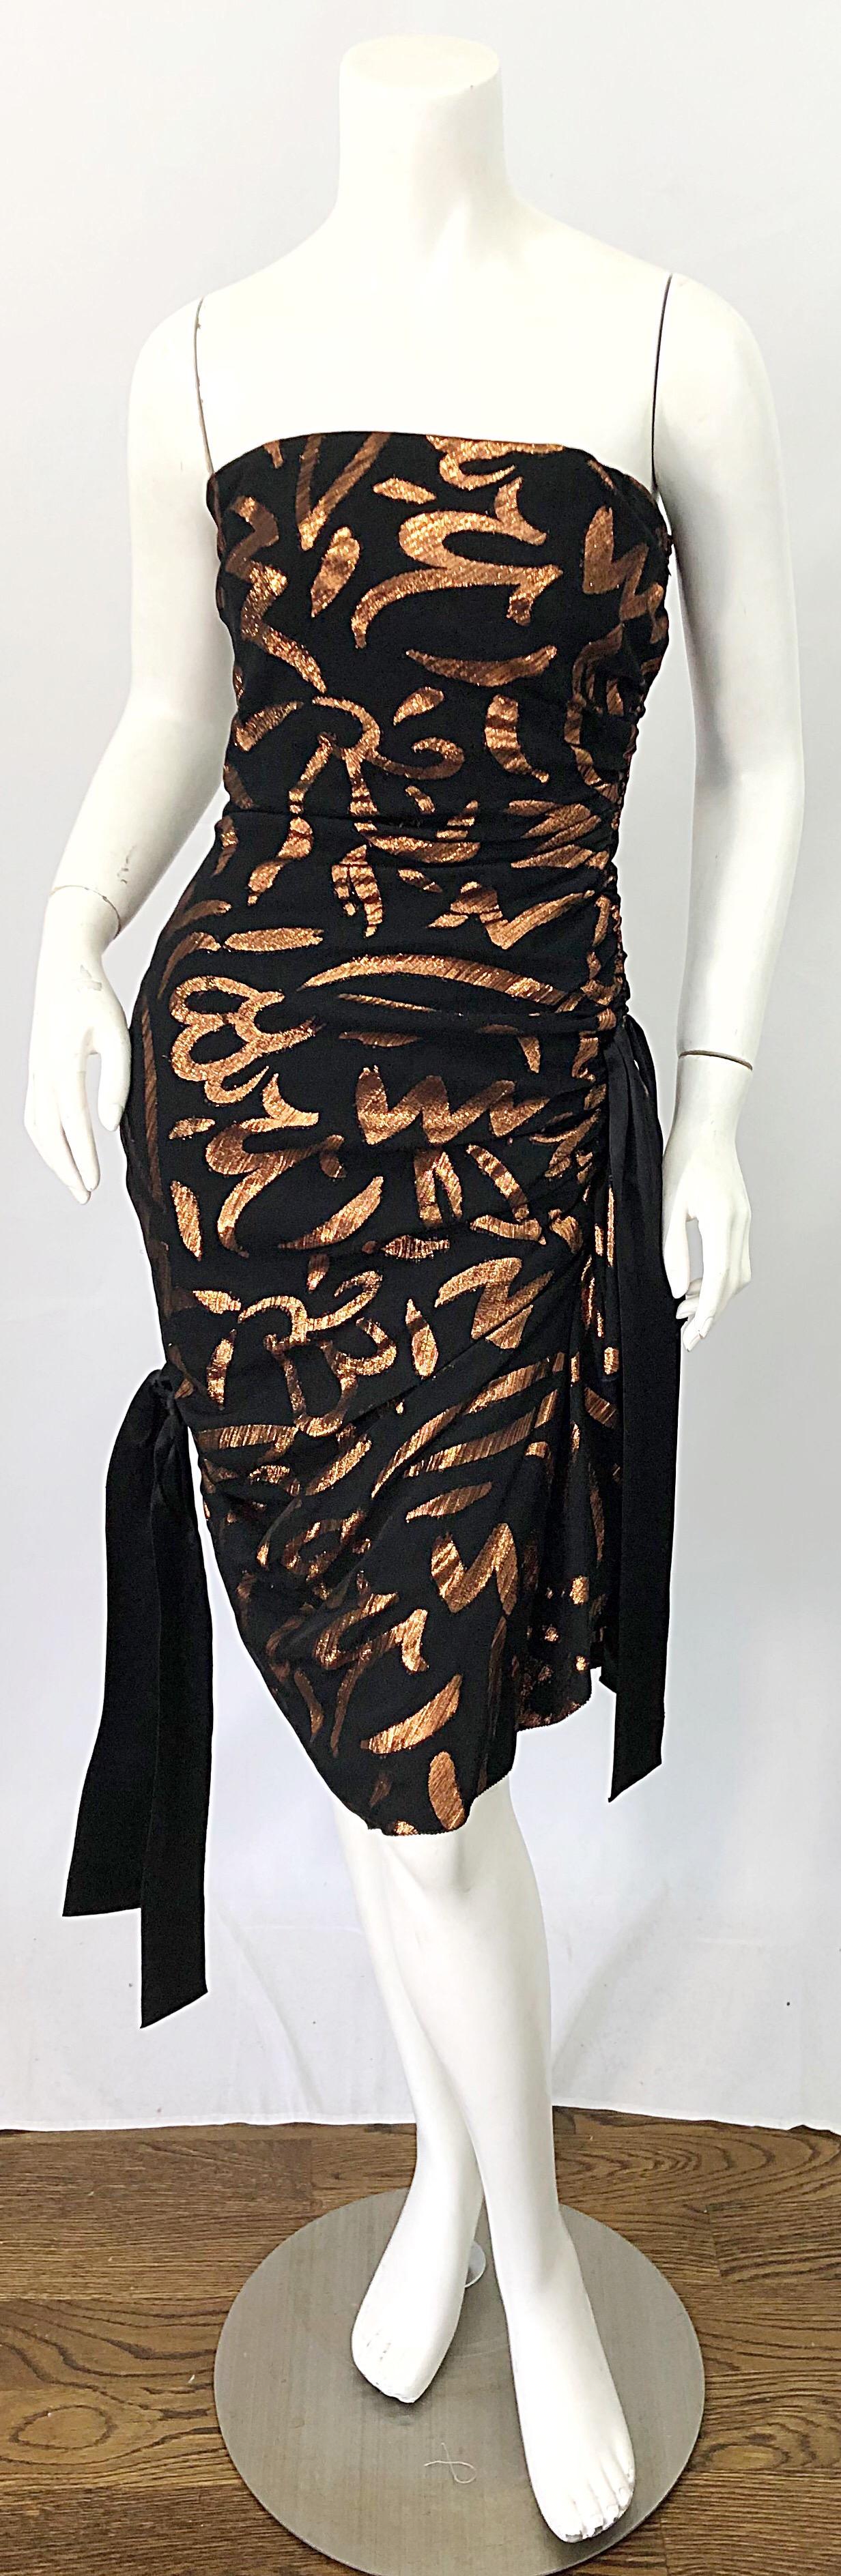 Rare Avant Garde vintage 80s TARQUIN EBKER black and metallic bronze batik print silk chiffon strapless dress! Ebker was known for his impeccable attention to detail, and his work was of couture quality. Asymmetrical hi-lo hem is longer in the front